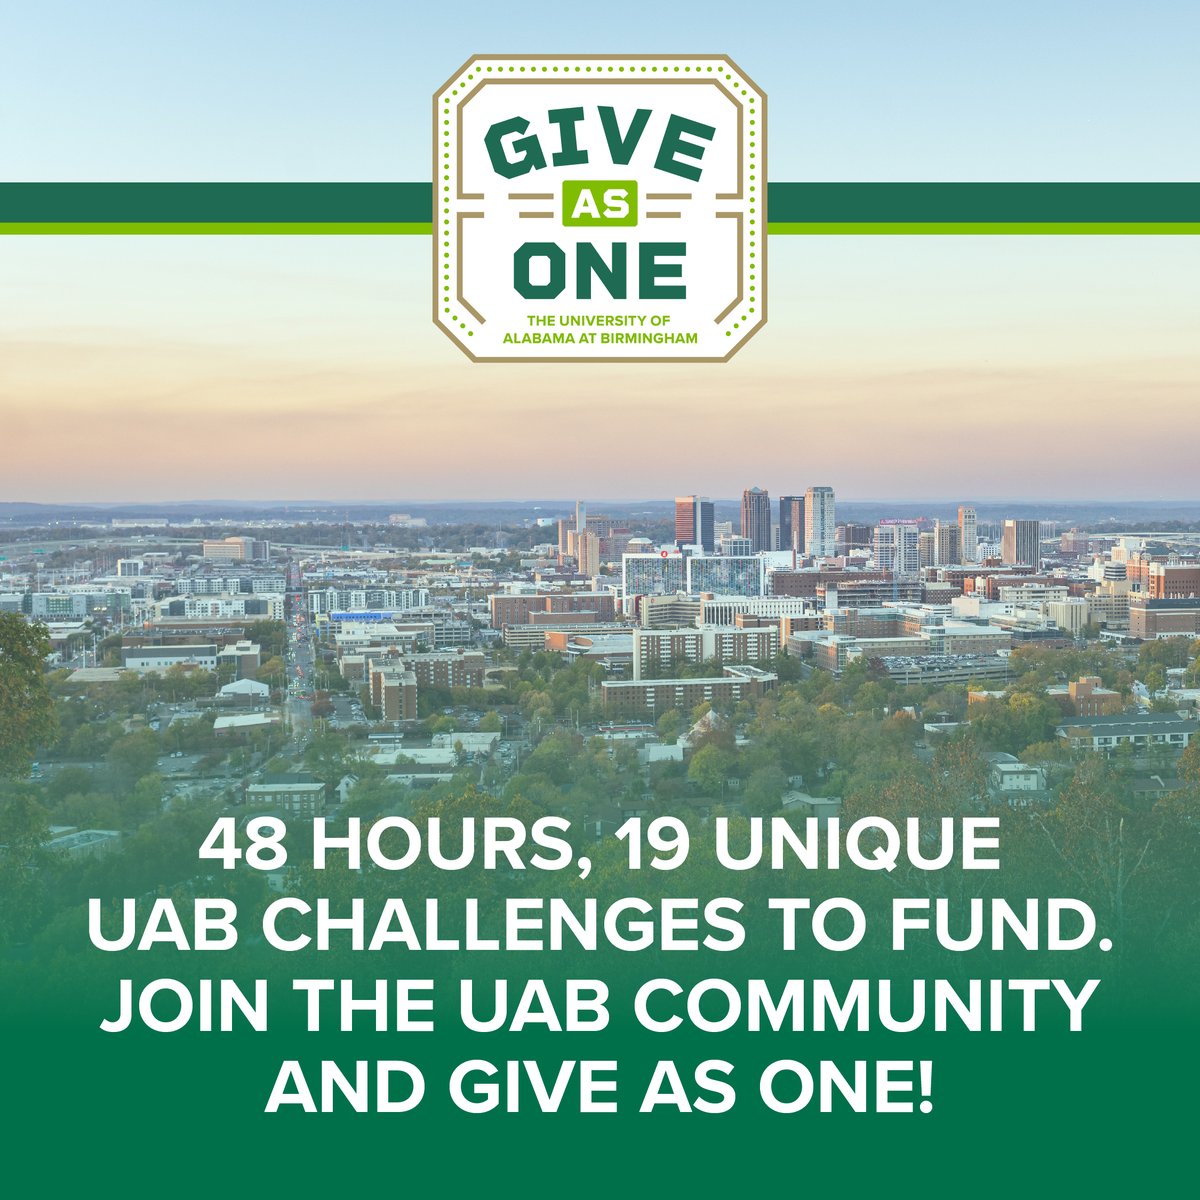 48 Hours. 19 UAB Challenges To Fund. On April 4 and April 5, join the UAB community for Give As One! Visit go.uab.edu/giveasone24 to learn more about the projects and initiatives featured this year. #GiveAsOne #UABGivingDay #Levelup4UAB #GAO24